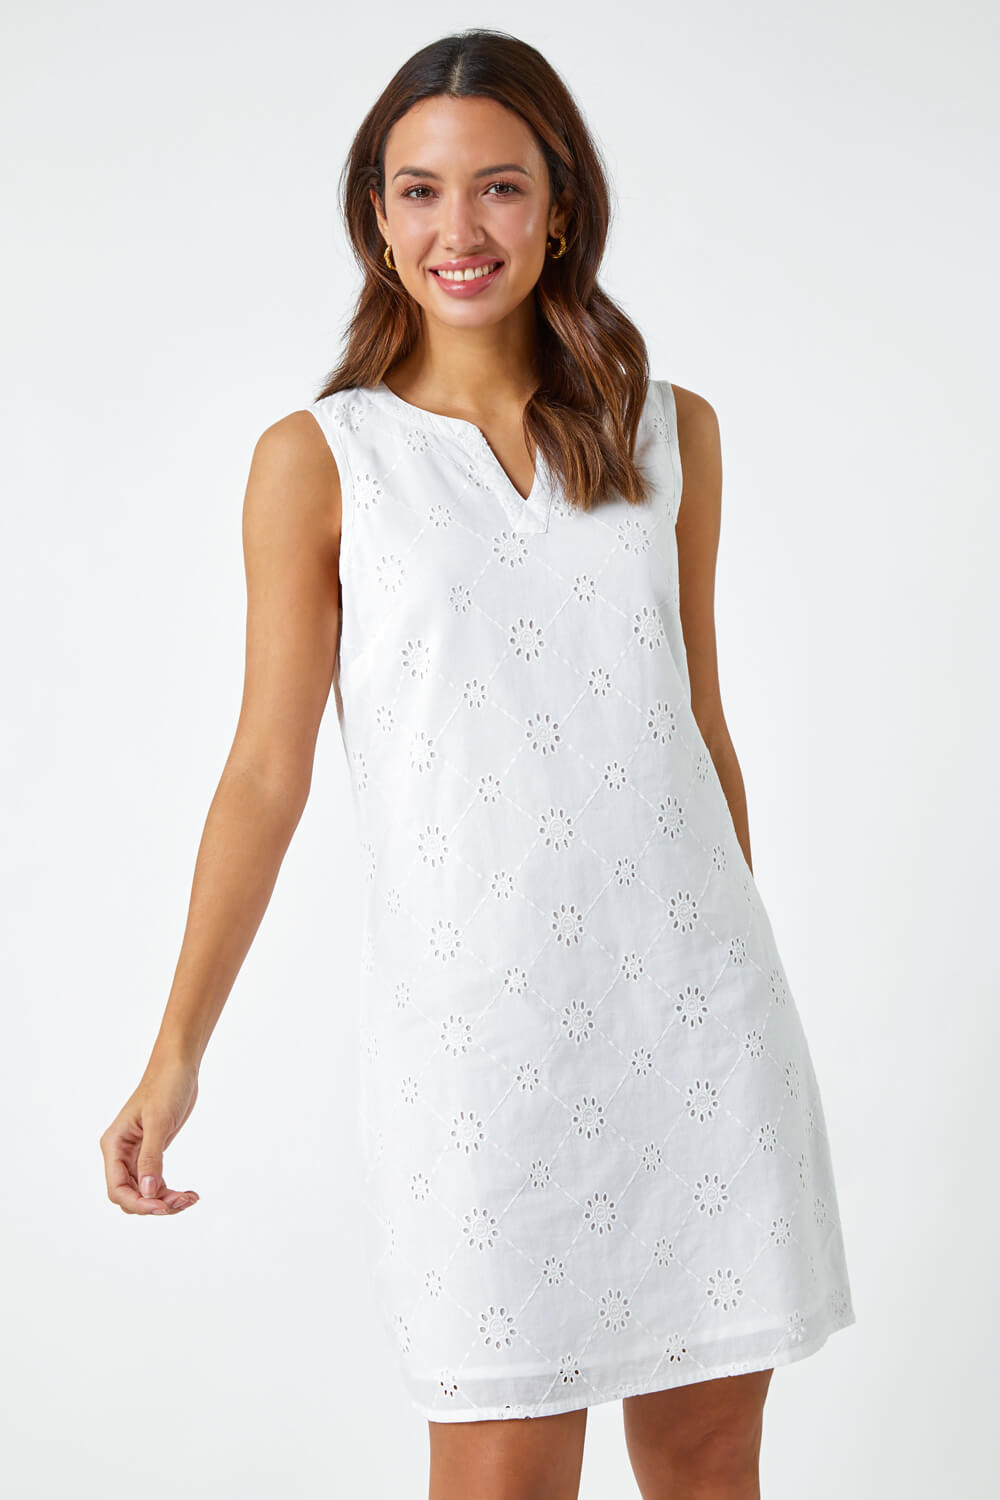 White Embroidered Cotton Shift Dress, Image 2 of 5